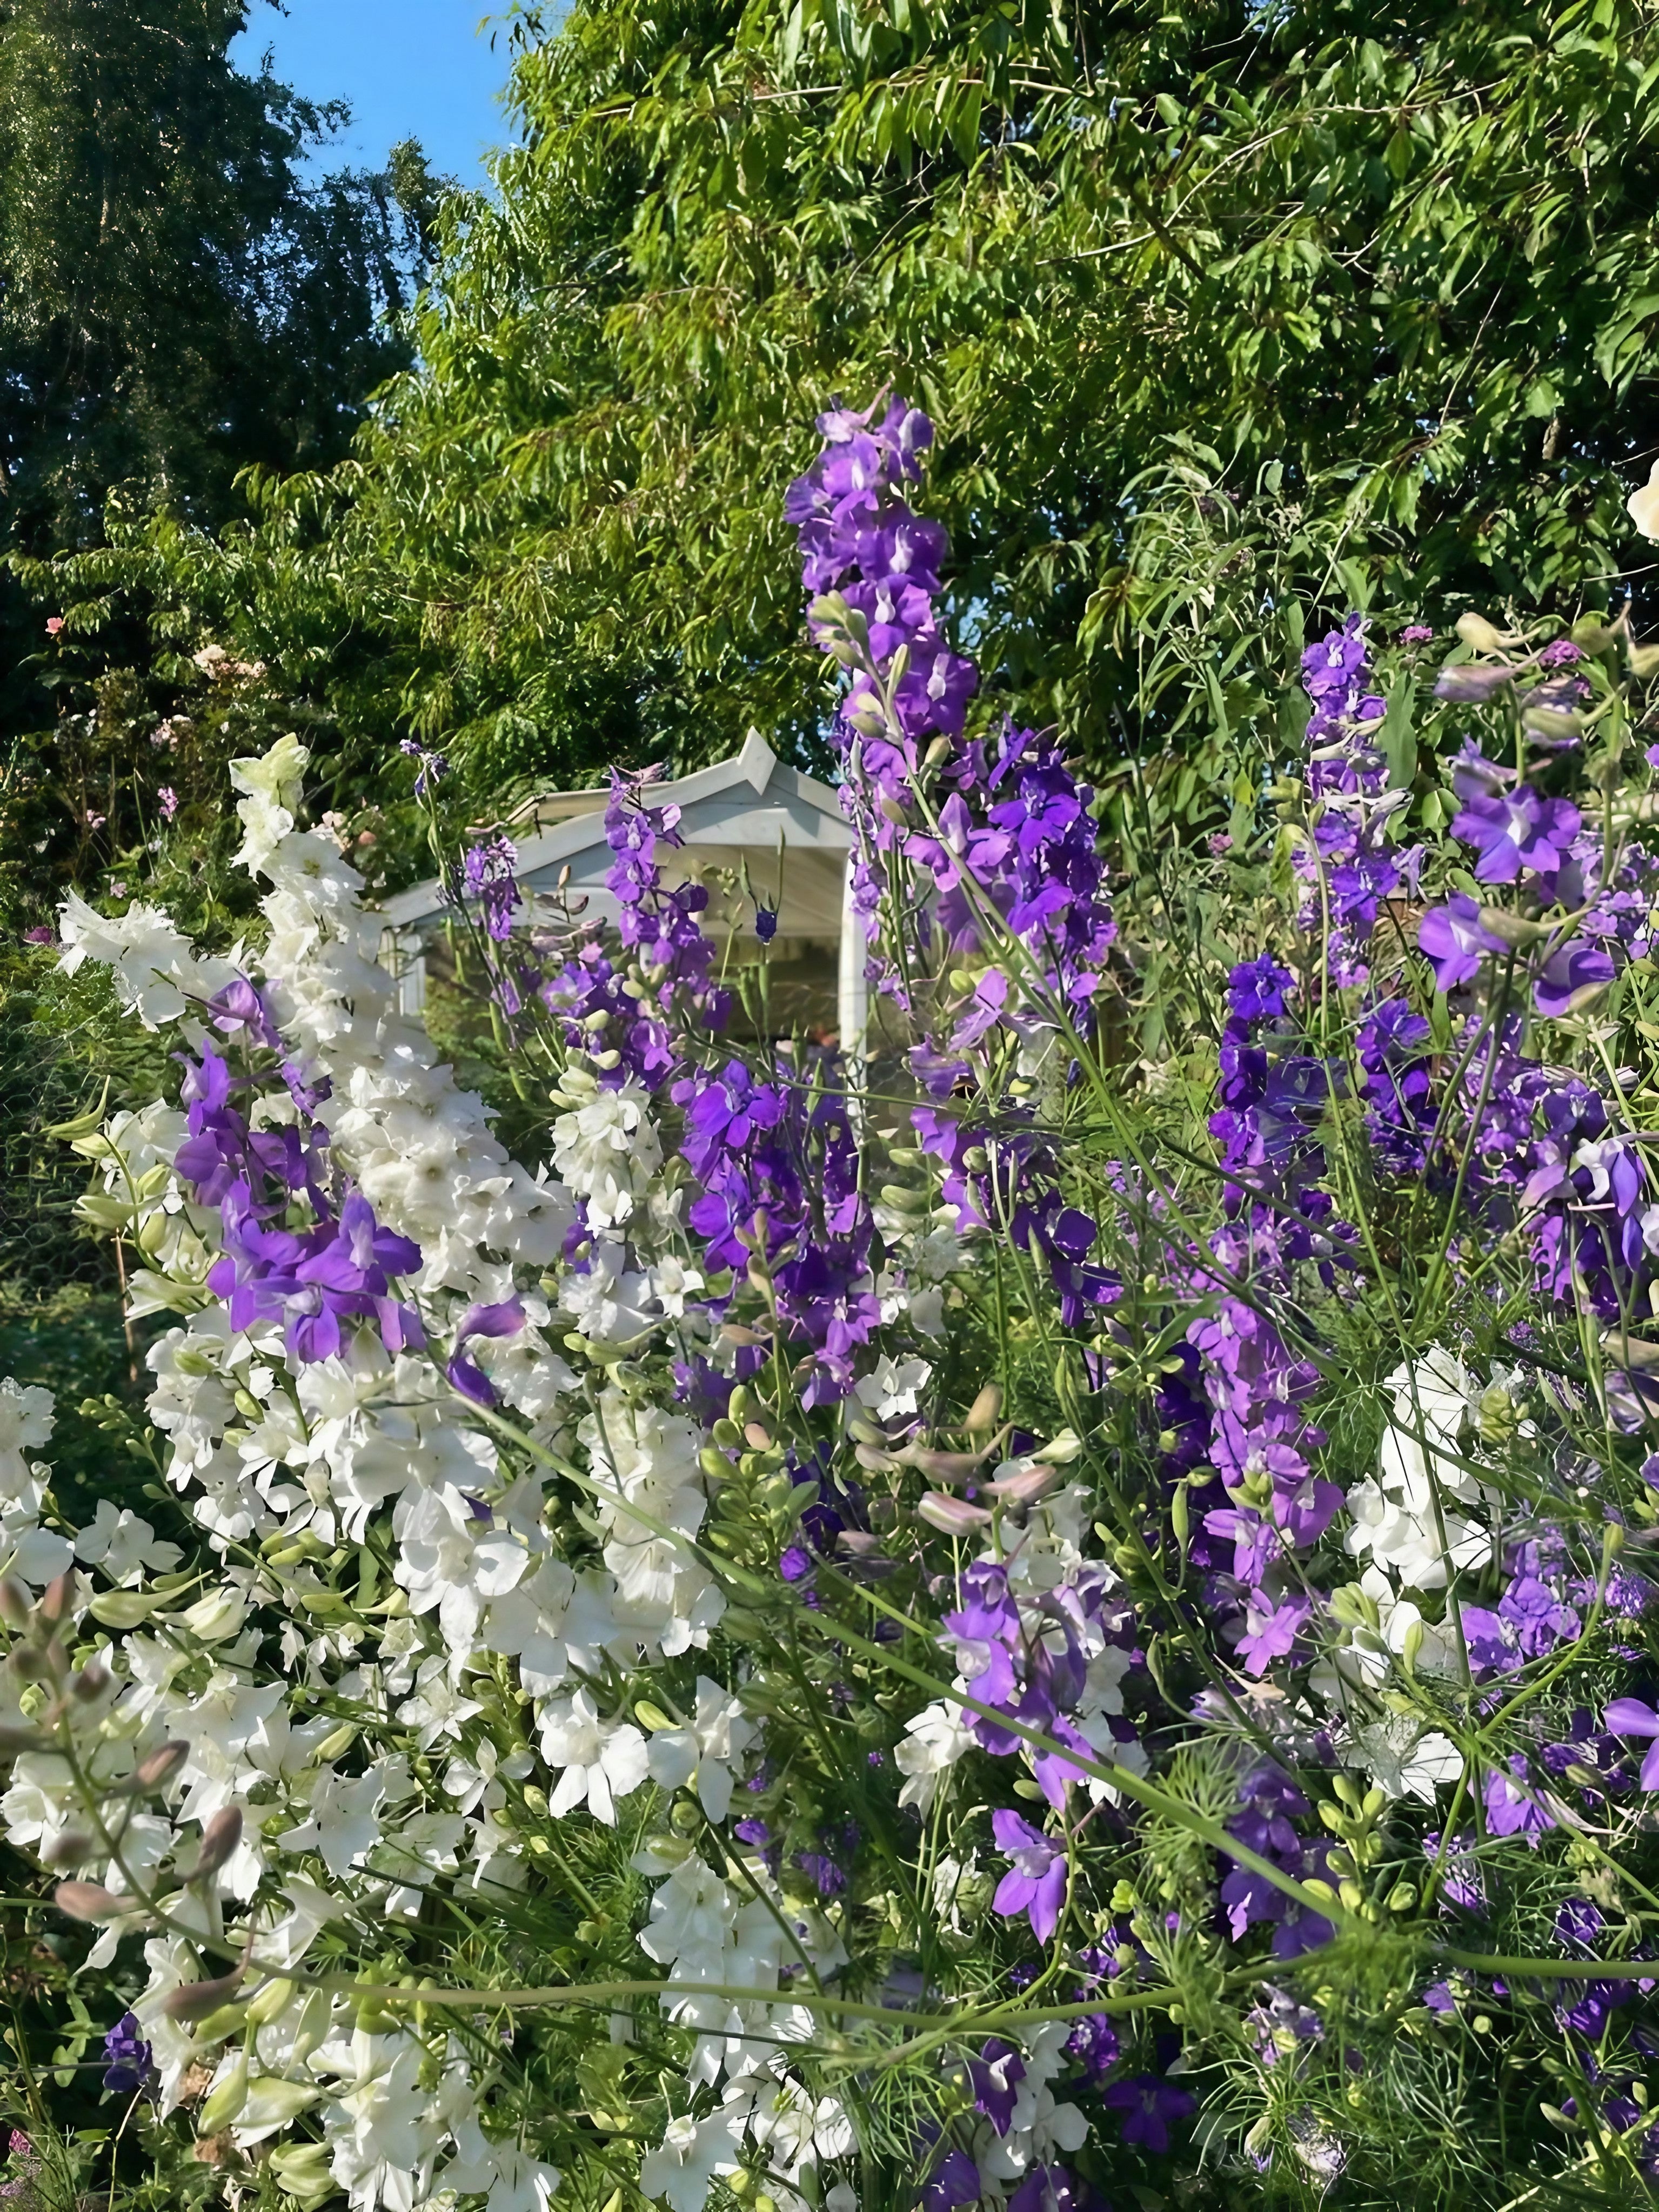 A dense cluster of Larkspur Giant Imperial Mix flowers showcasing their purple and white hues